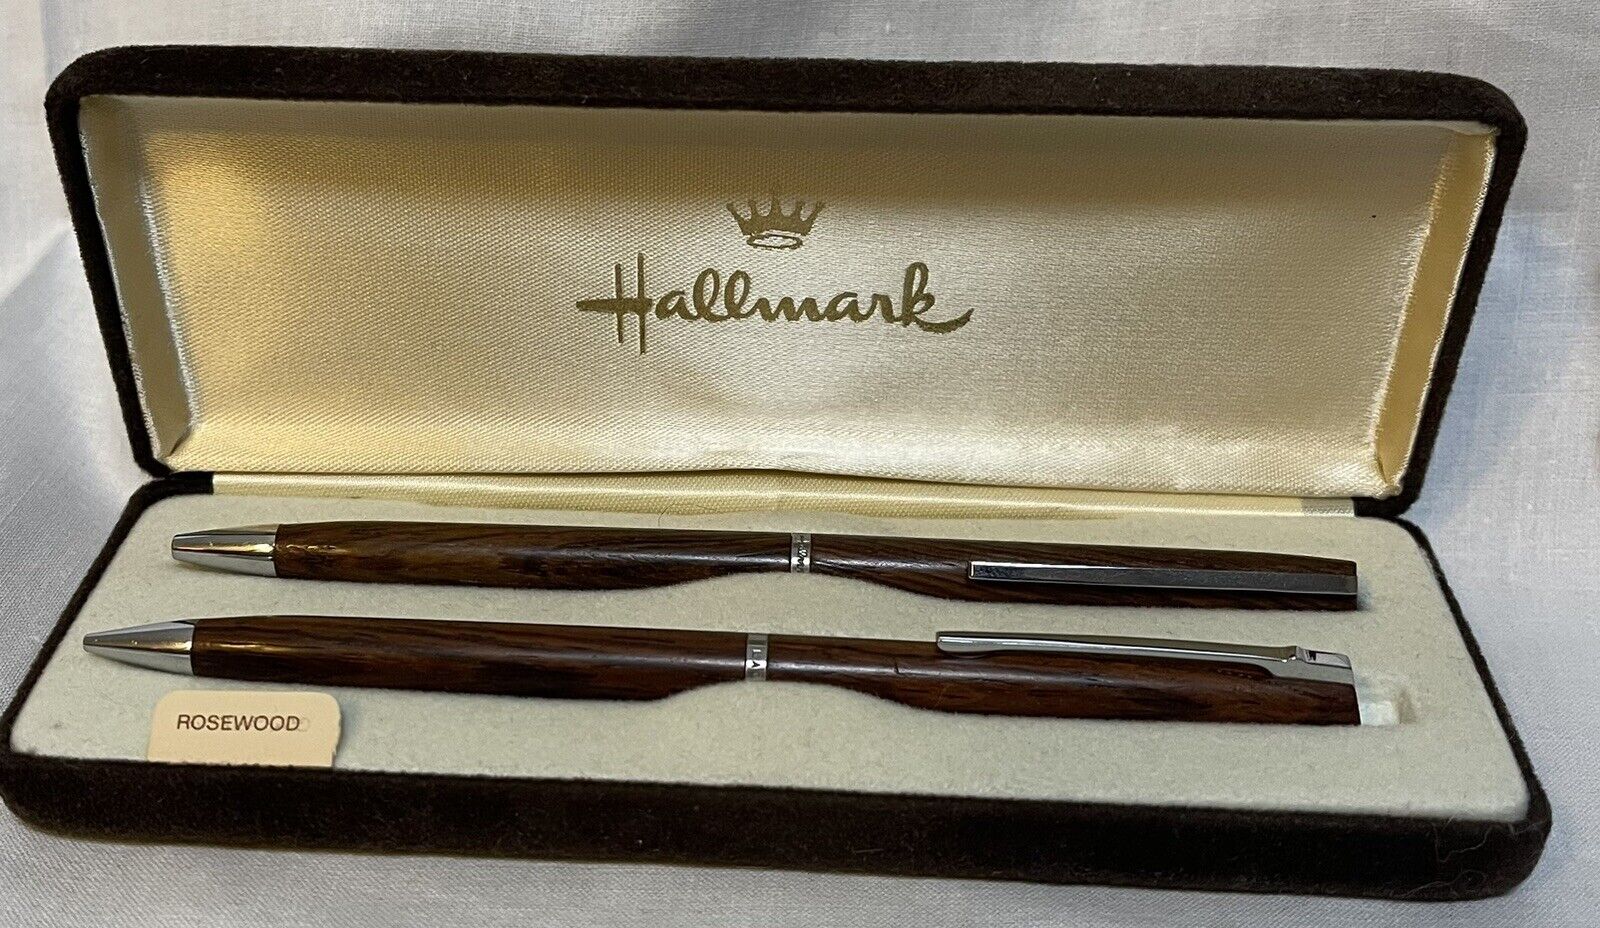 VTG Hallmark Wood Pen And Mechanical Pencil Set Rosewood Needs Ink With Case